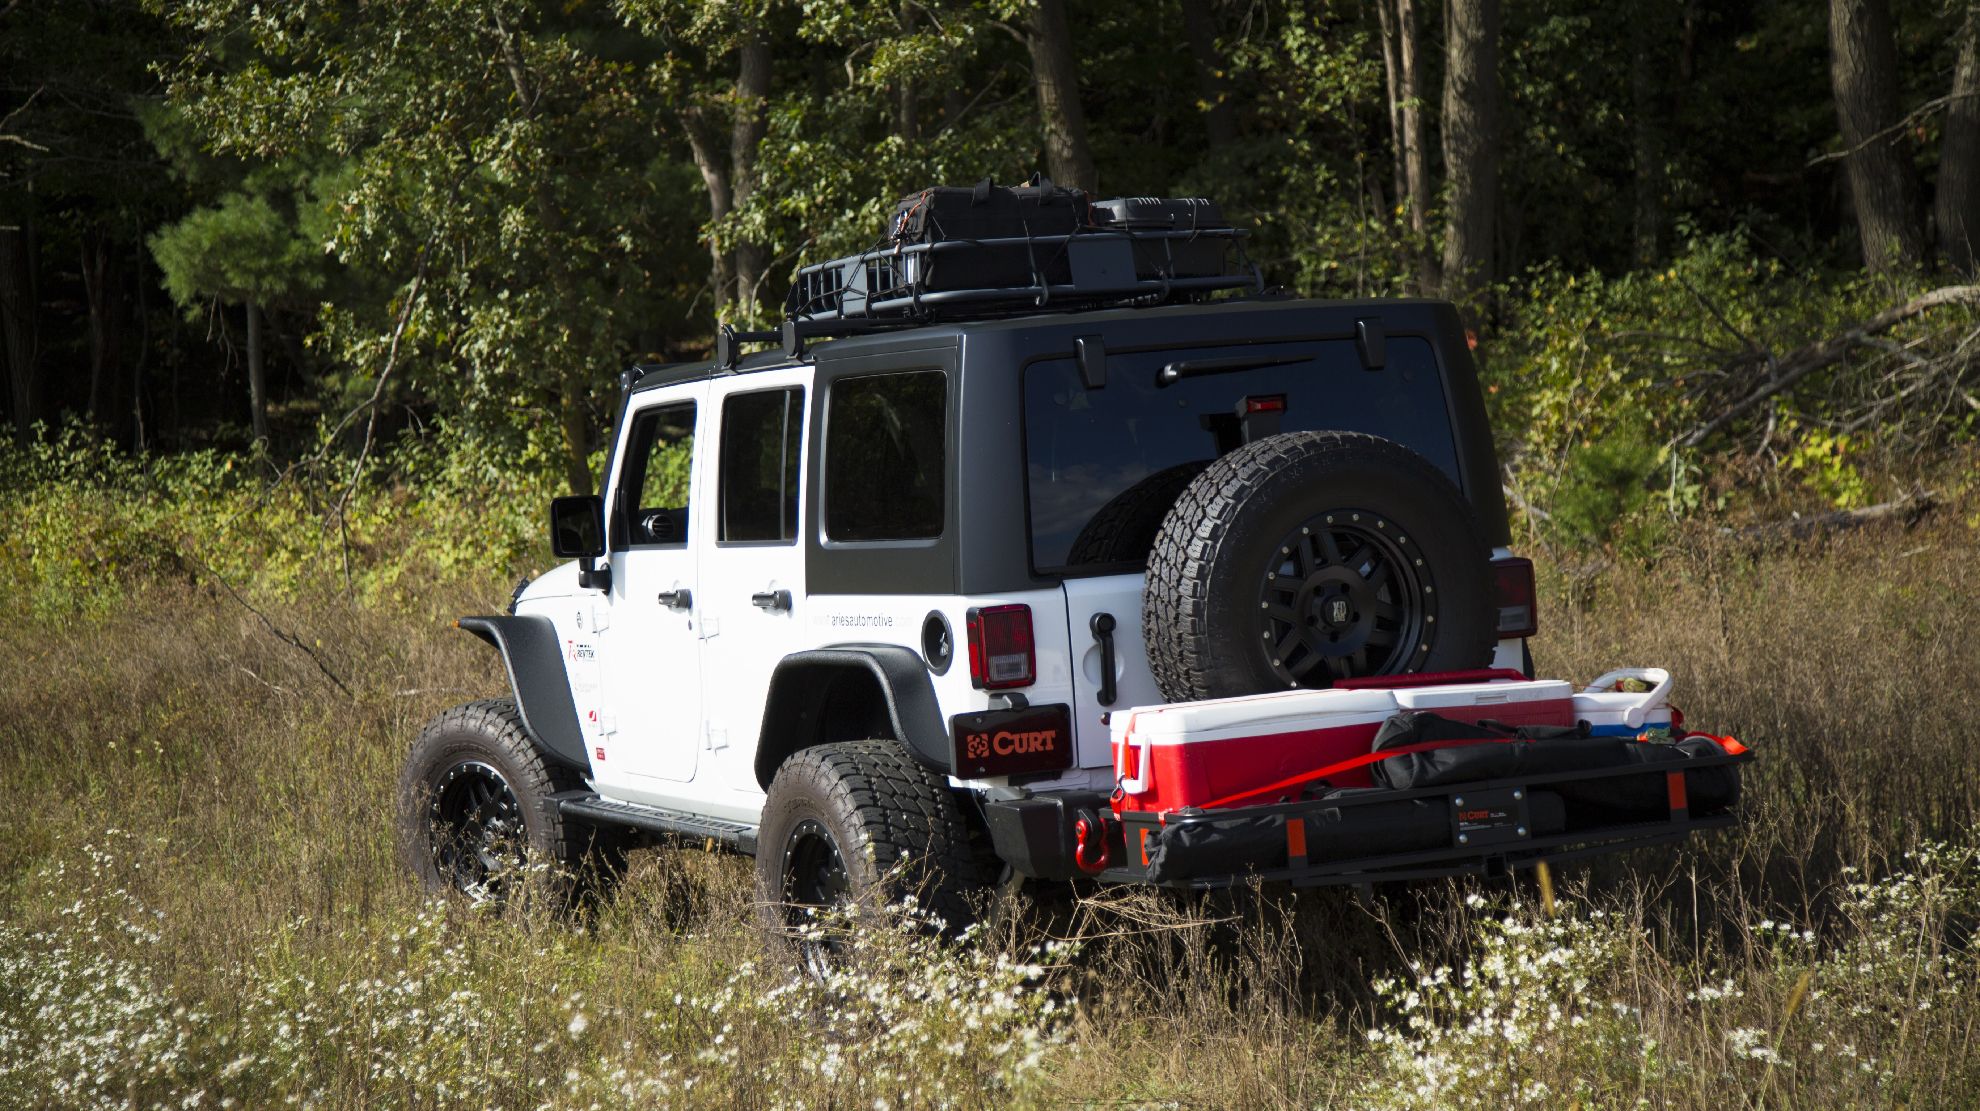 Jeep in a grassy field with a hitch mounted cargo basket